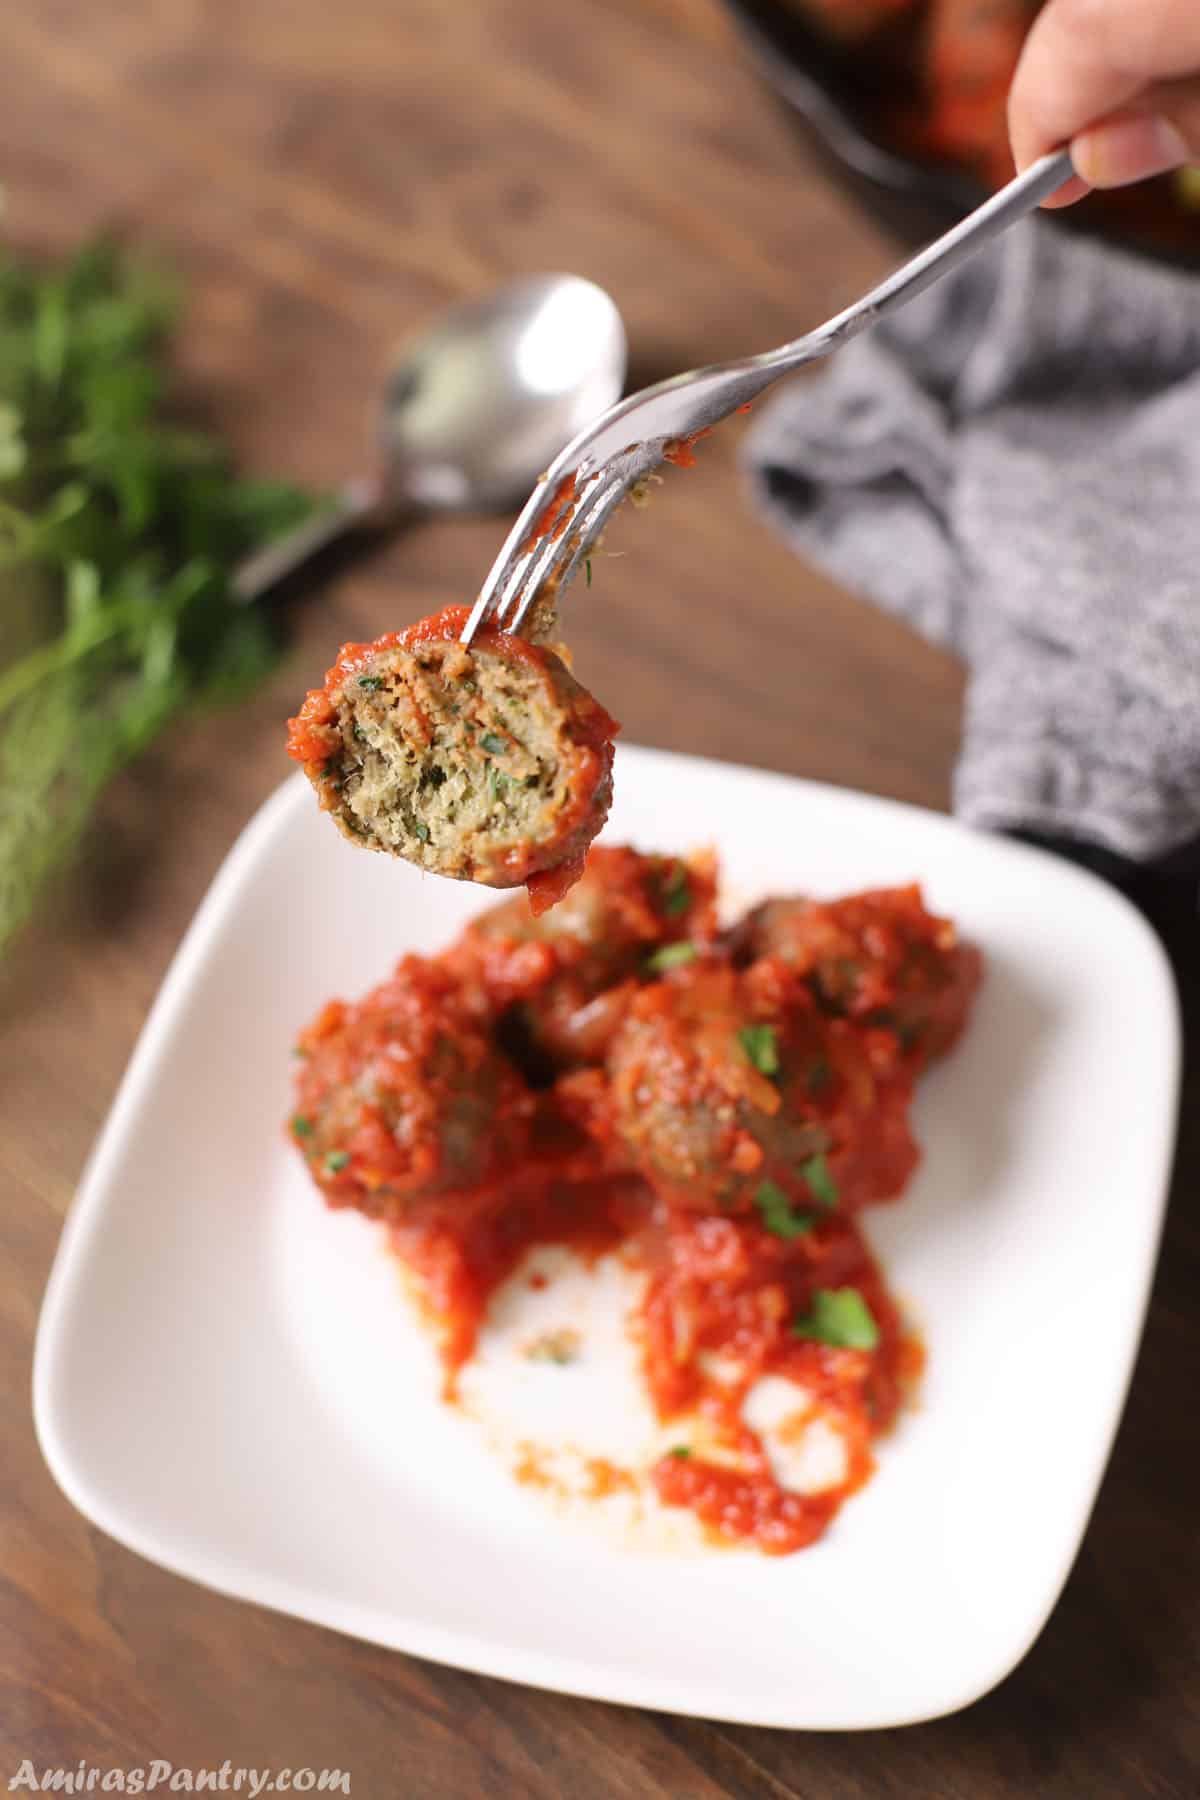 A hand holding a fork with a gluten free meatball cut to show texture.